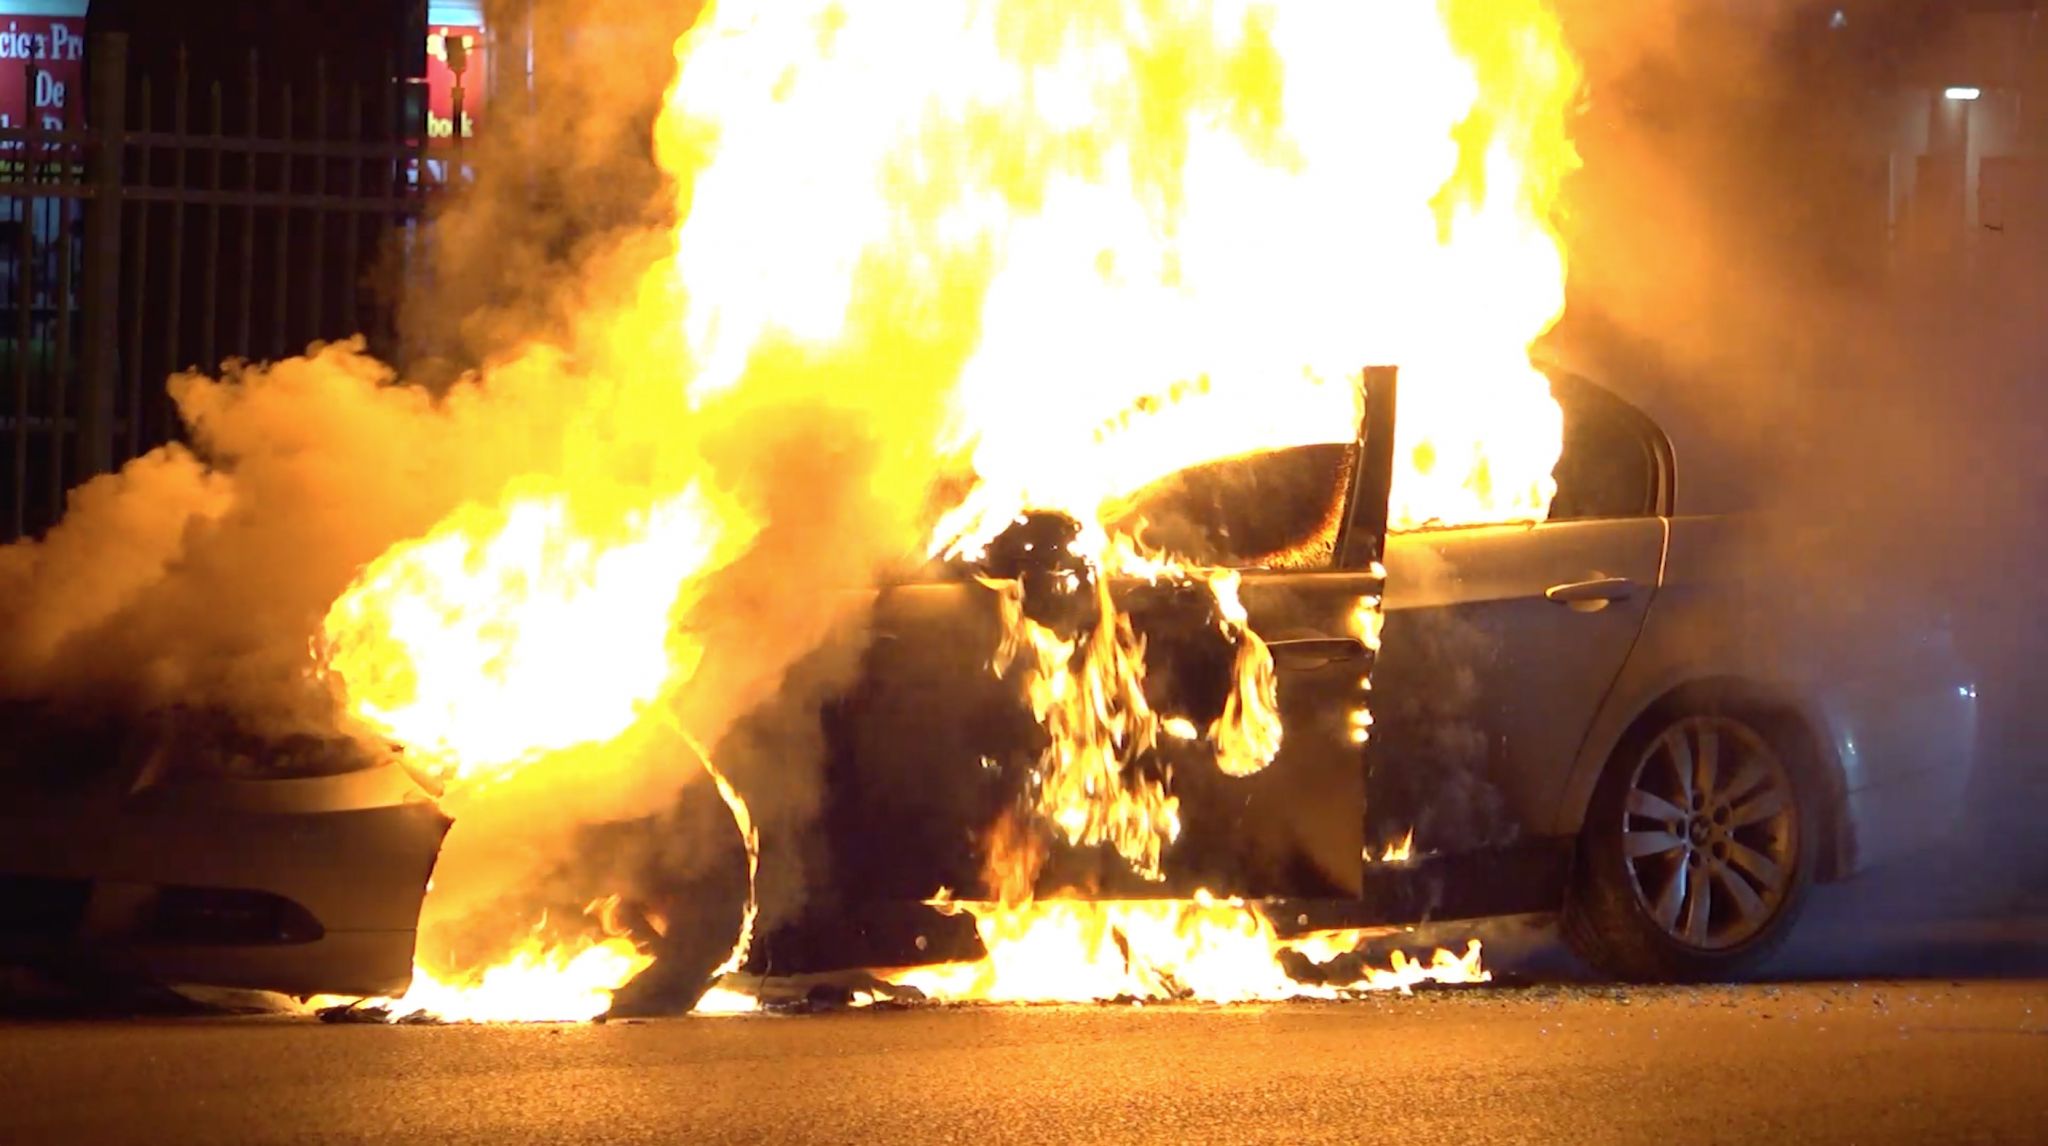 After fleeing crash, BMW driver watches car burn from back of police ...